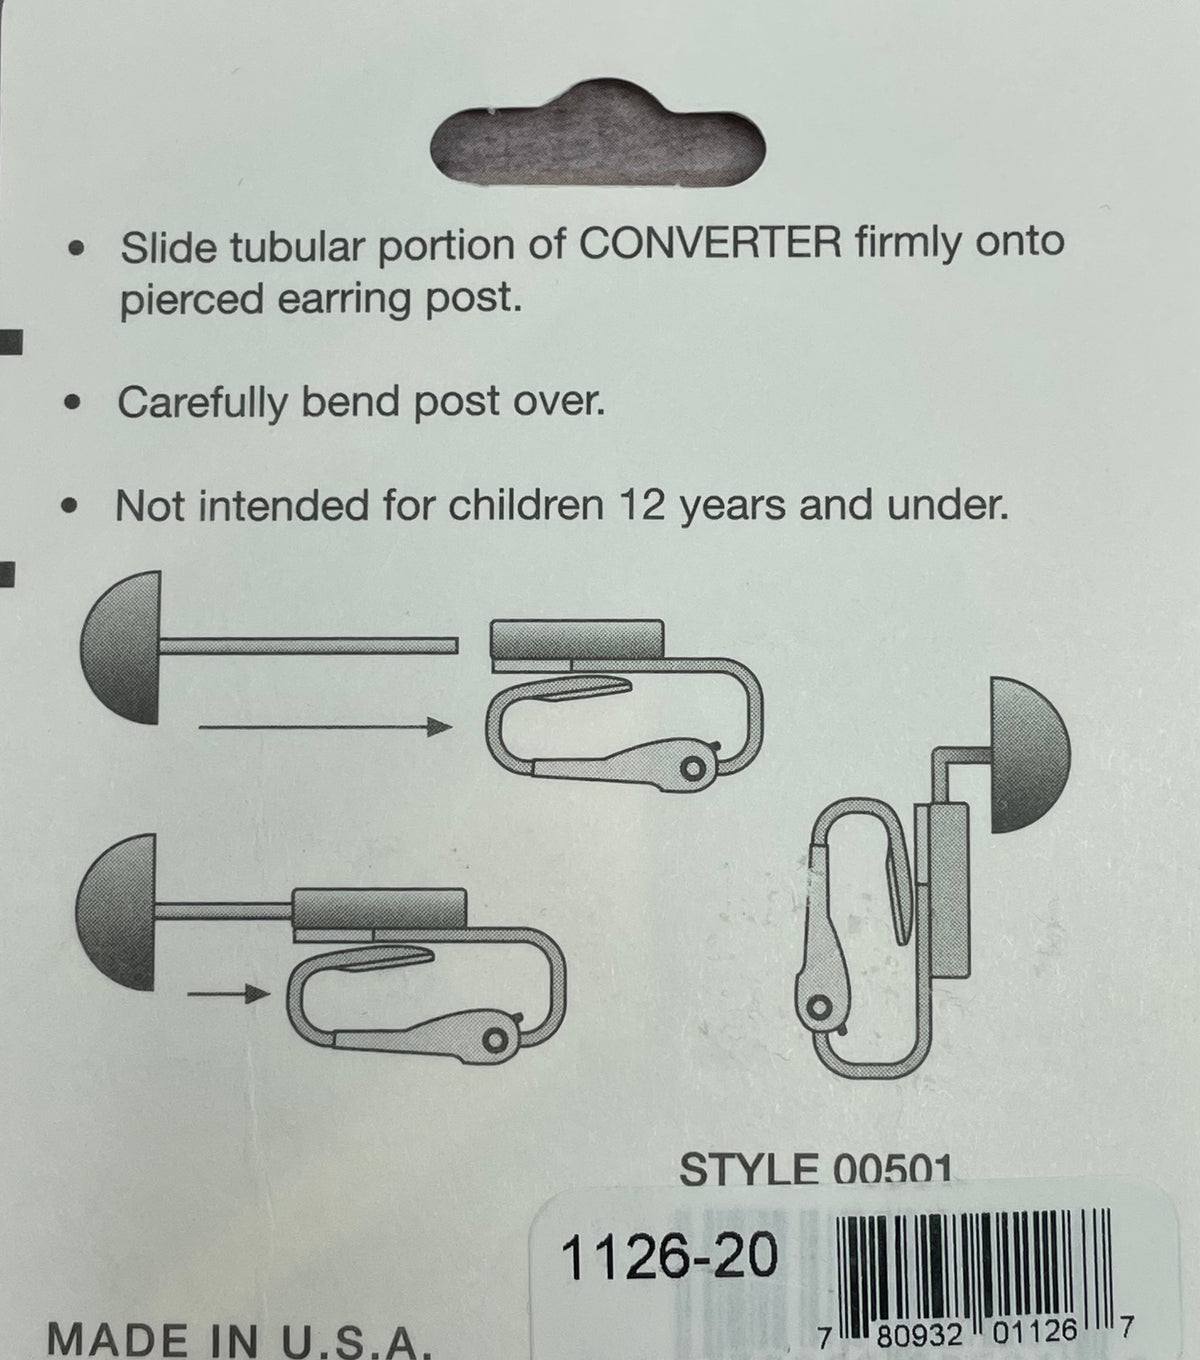 Converters for Pierced Earring To Clip